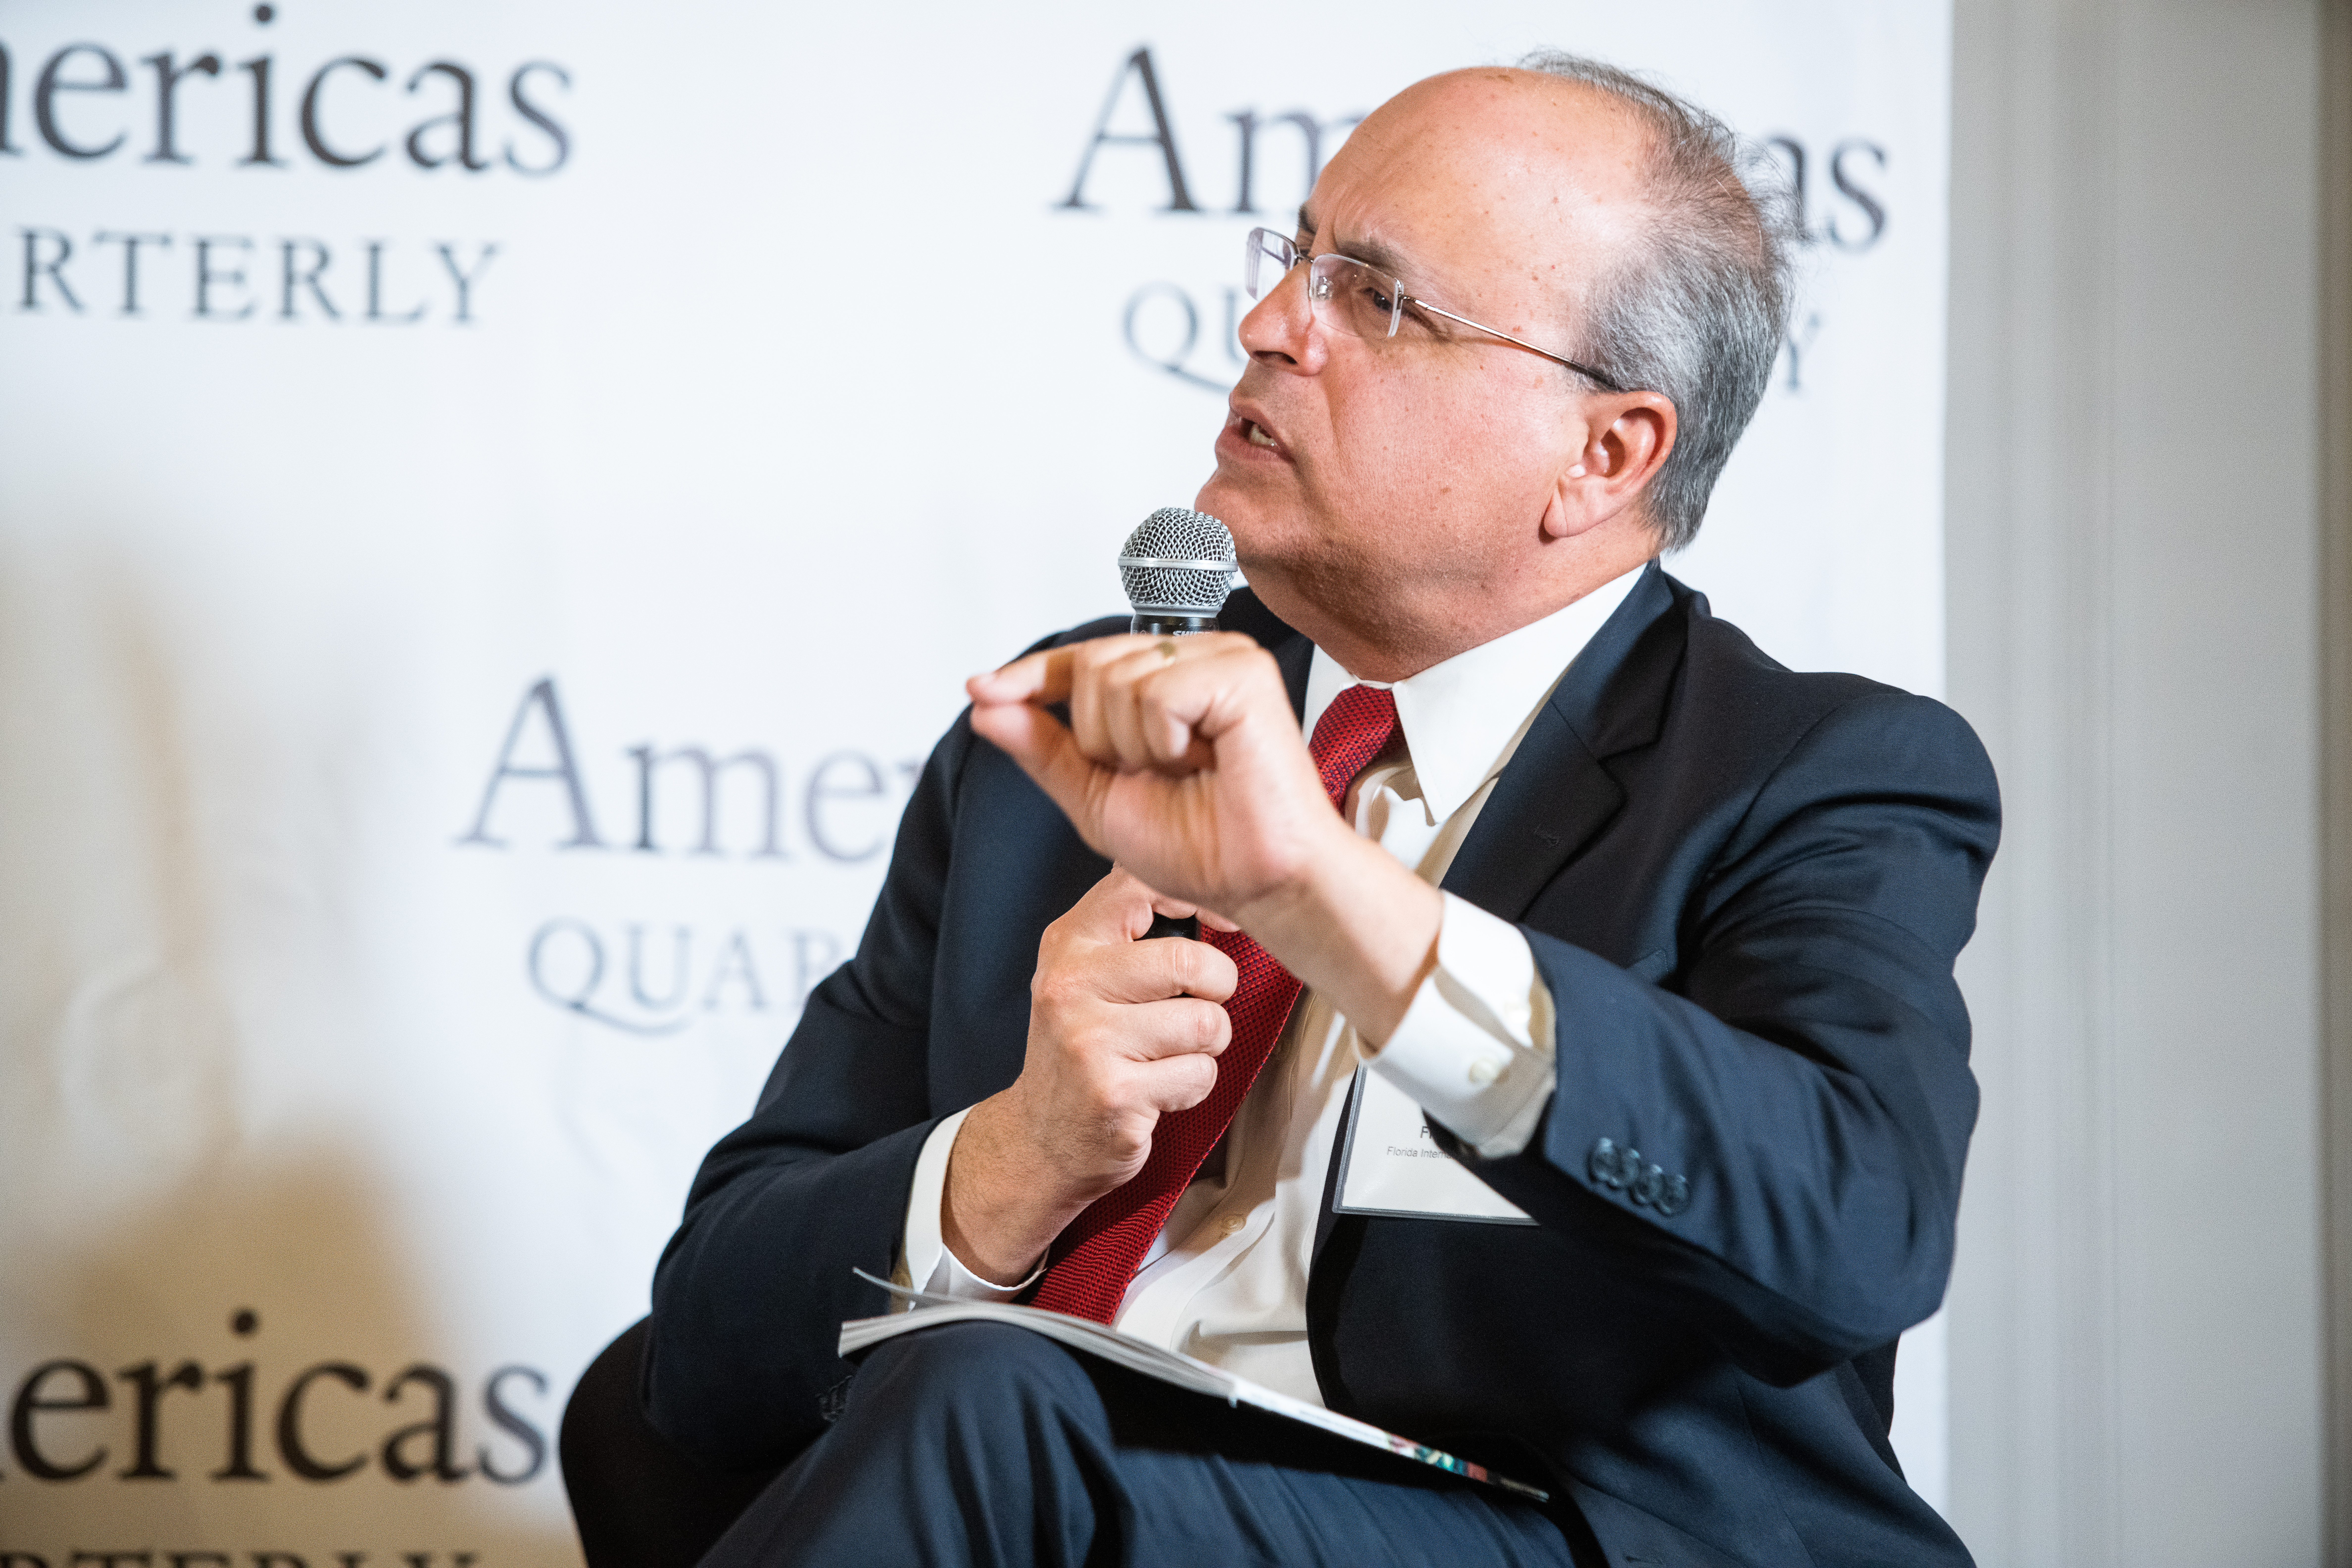 Frank Mora at Americas Quarterly launch in NYC.